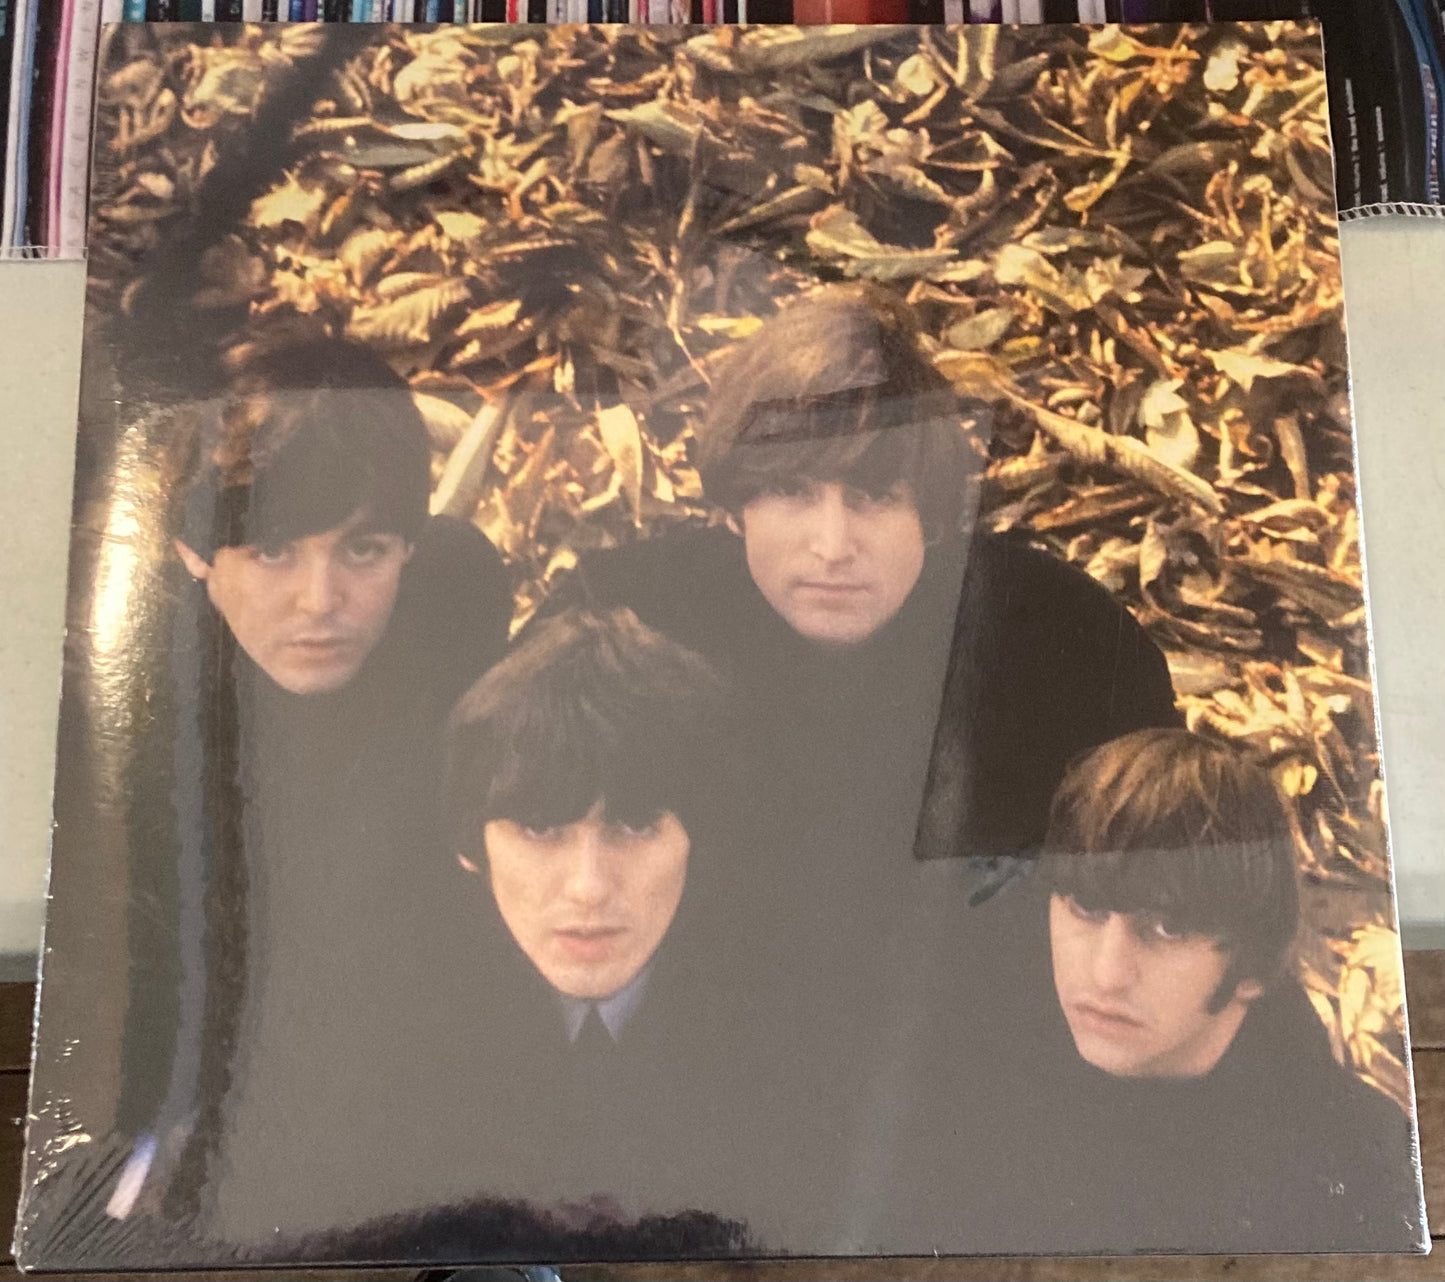 The back of 'The Beatles - Beatles for sale' on vinyl. It is brand new and sealed.